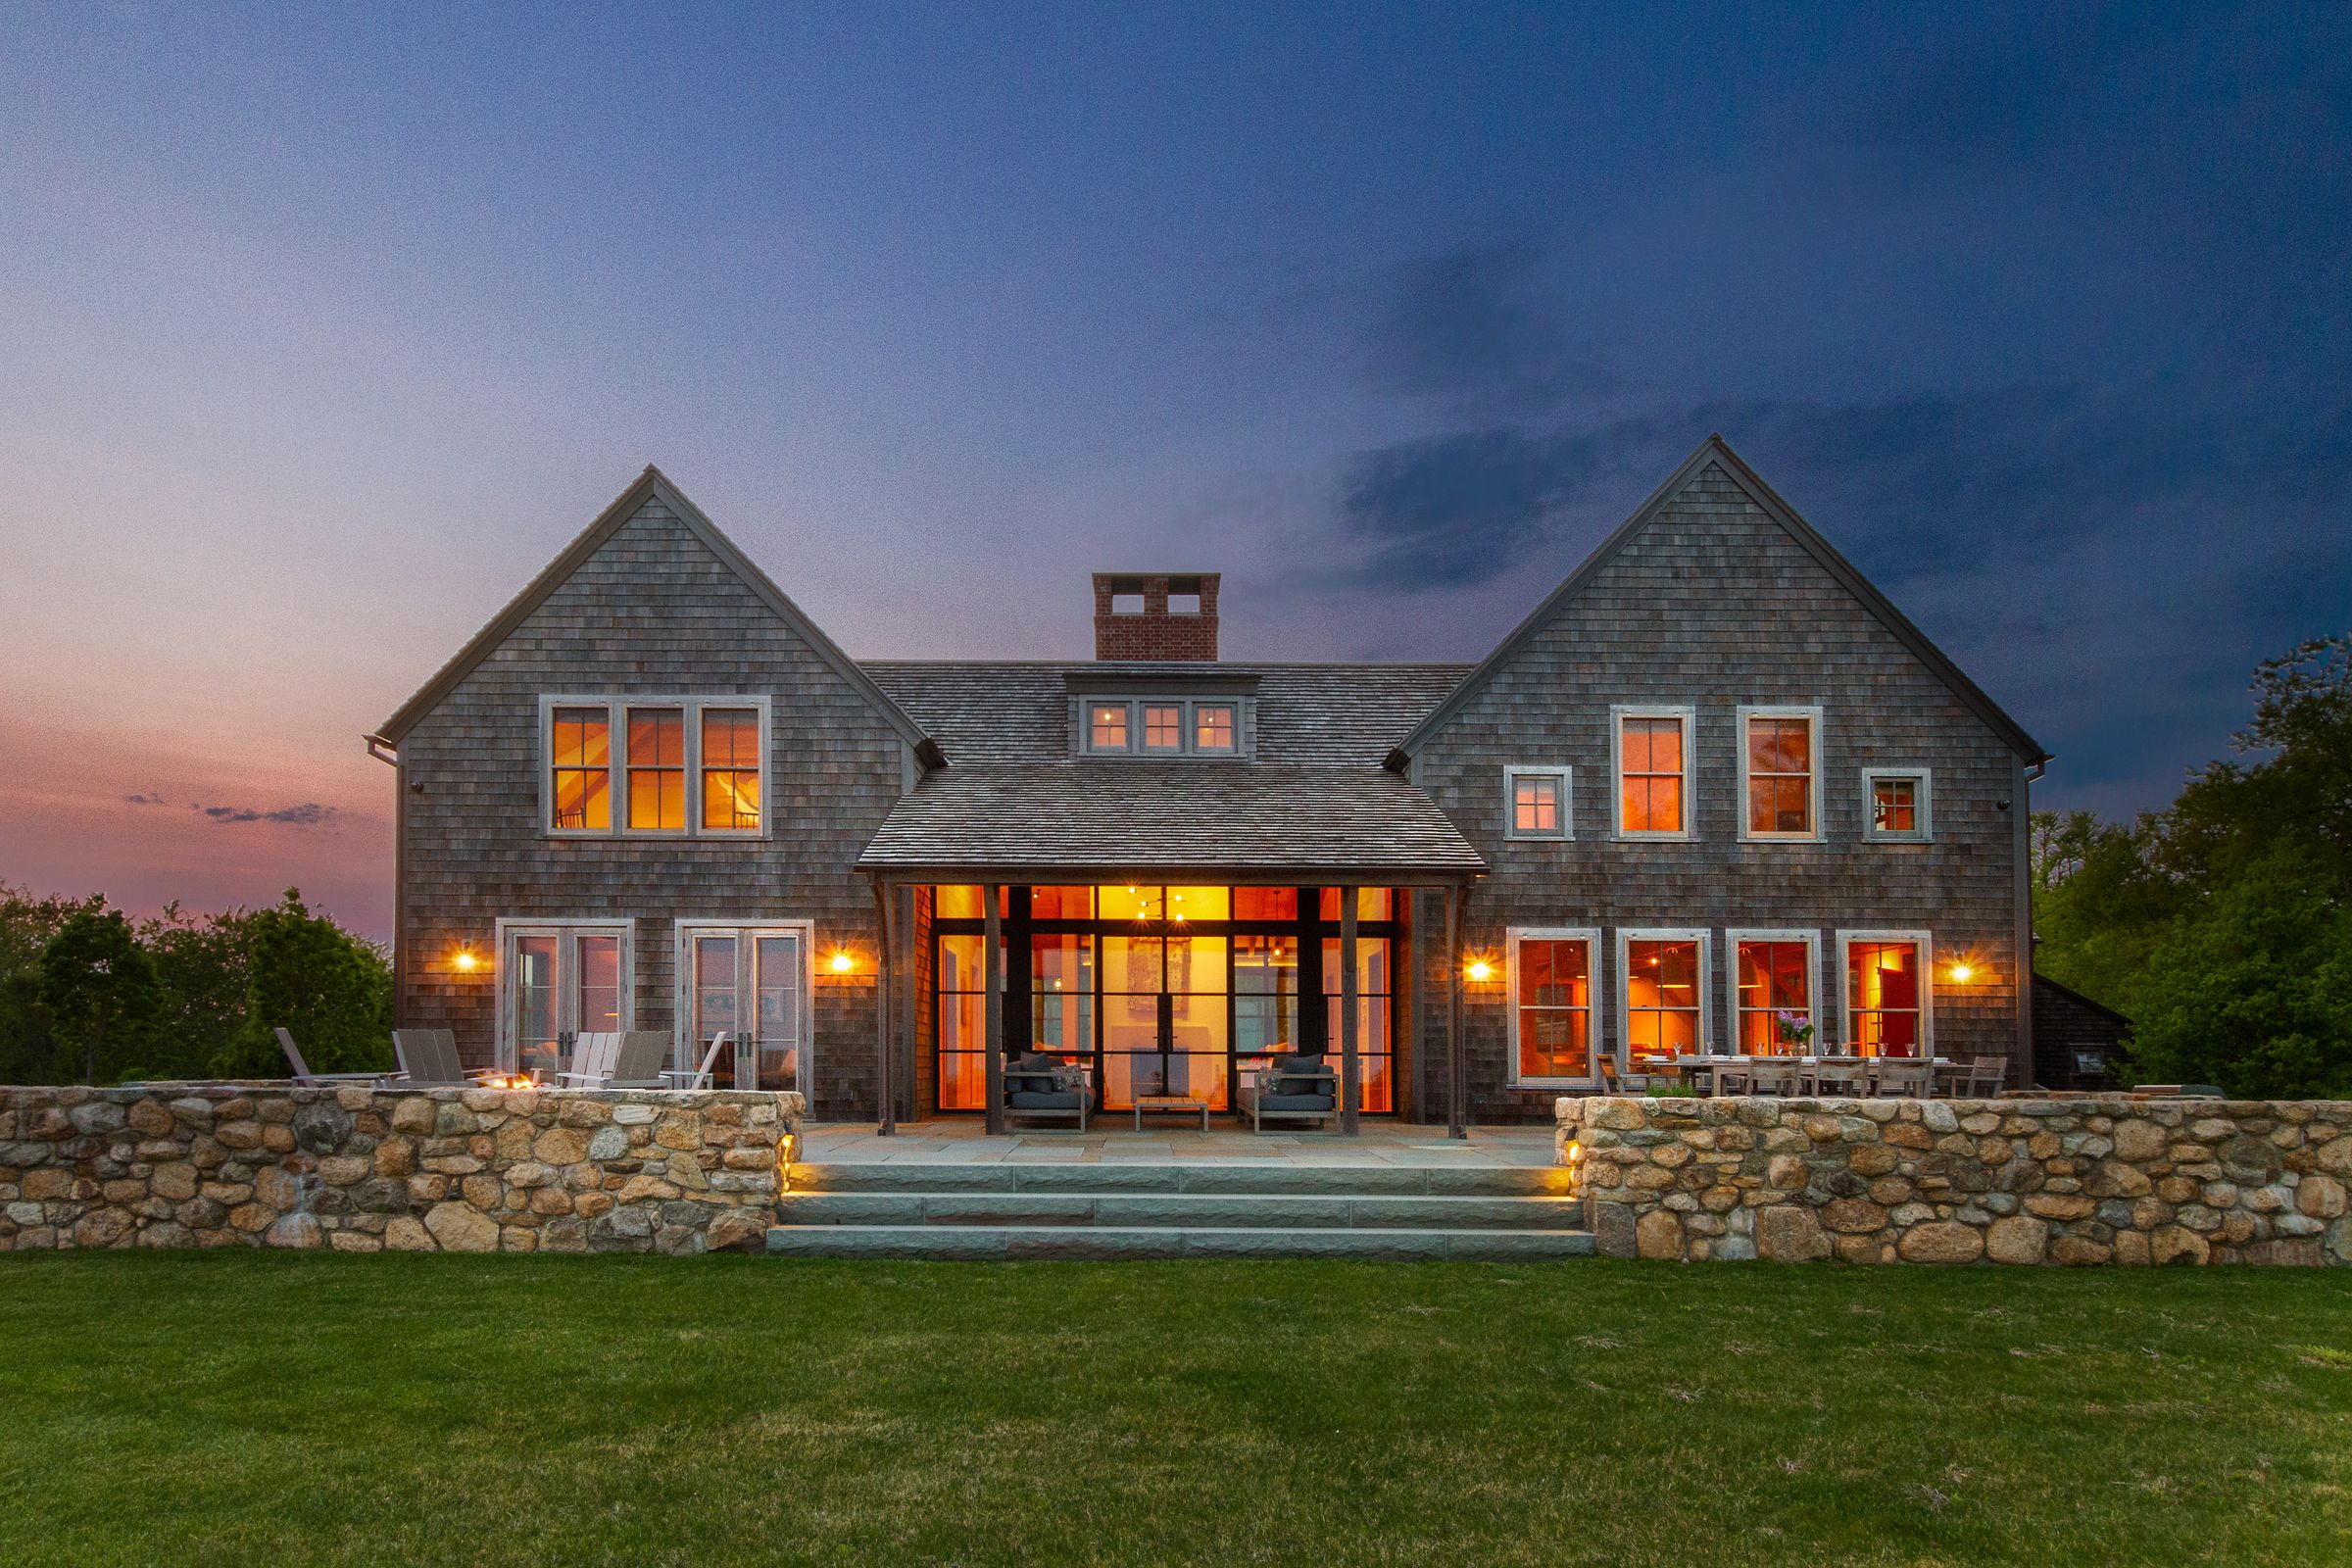 HOUSE OF THE WEEK: BLOCK ISLAND LUXURY BEACH HOUSE LISTED FOR $9.8 MILLION